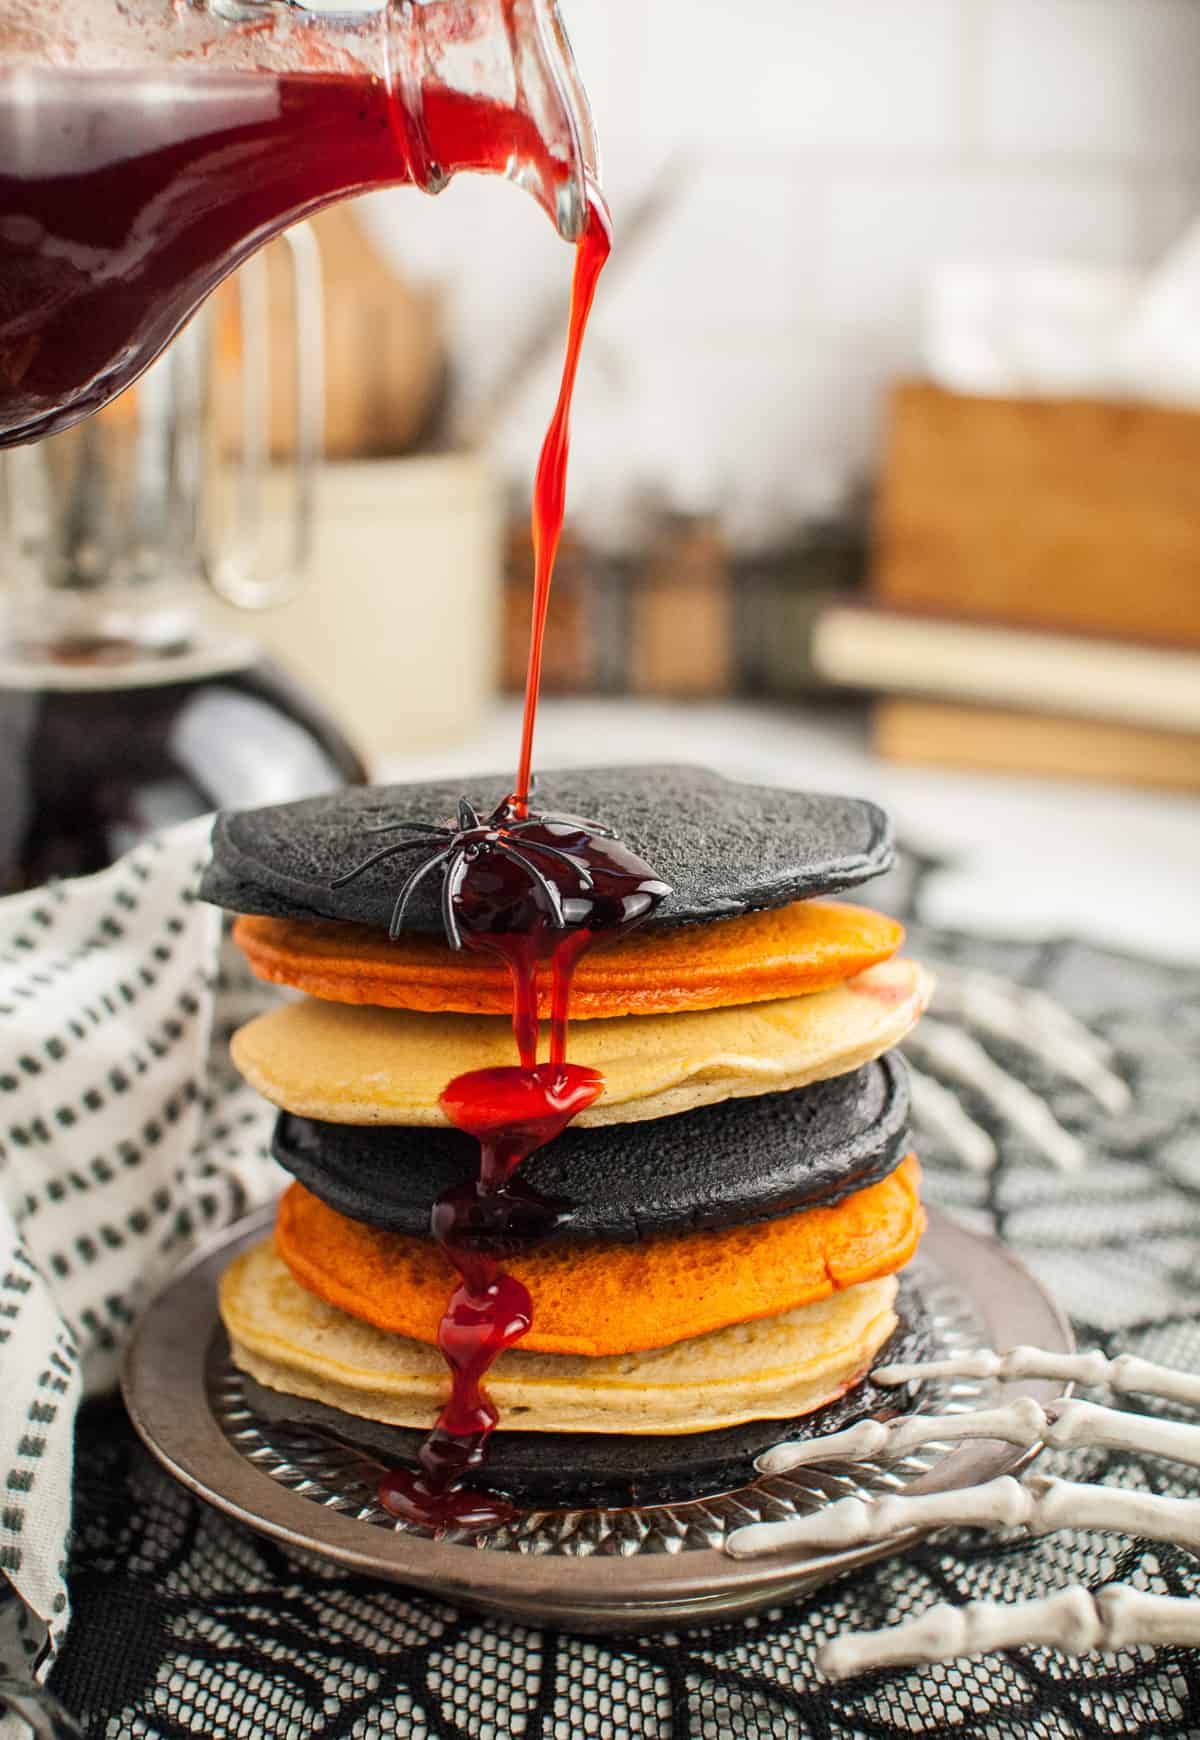 Red strawberry syrup being poured over a stack of black, orange, and white pancakes for a Halloween breakfast.